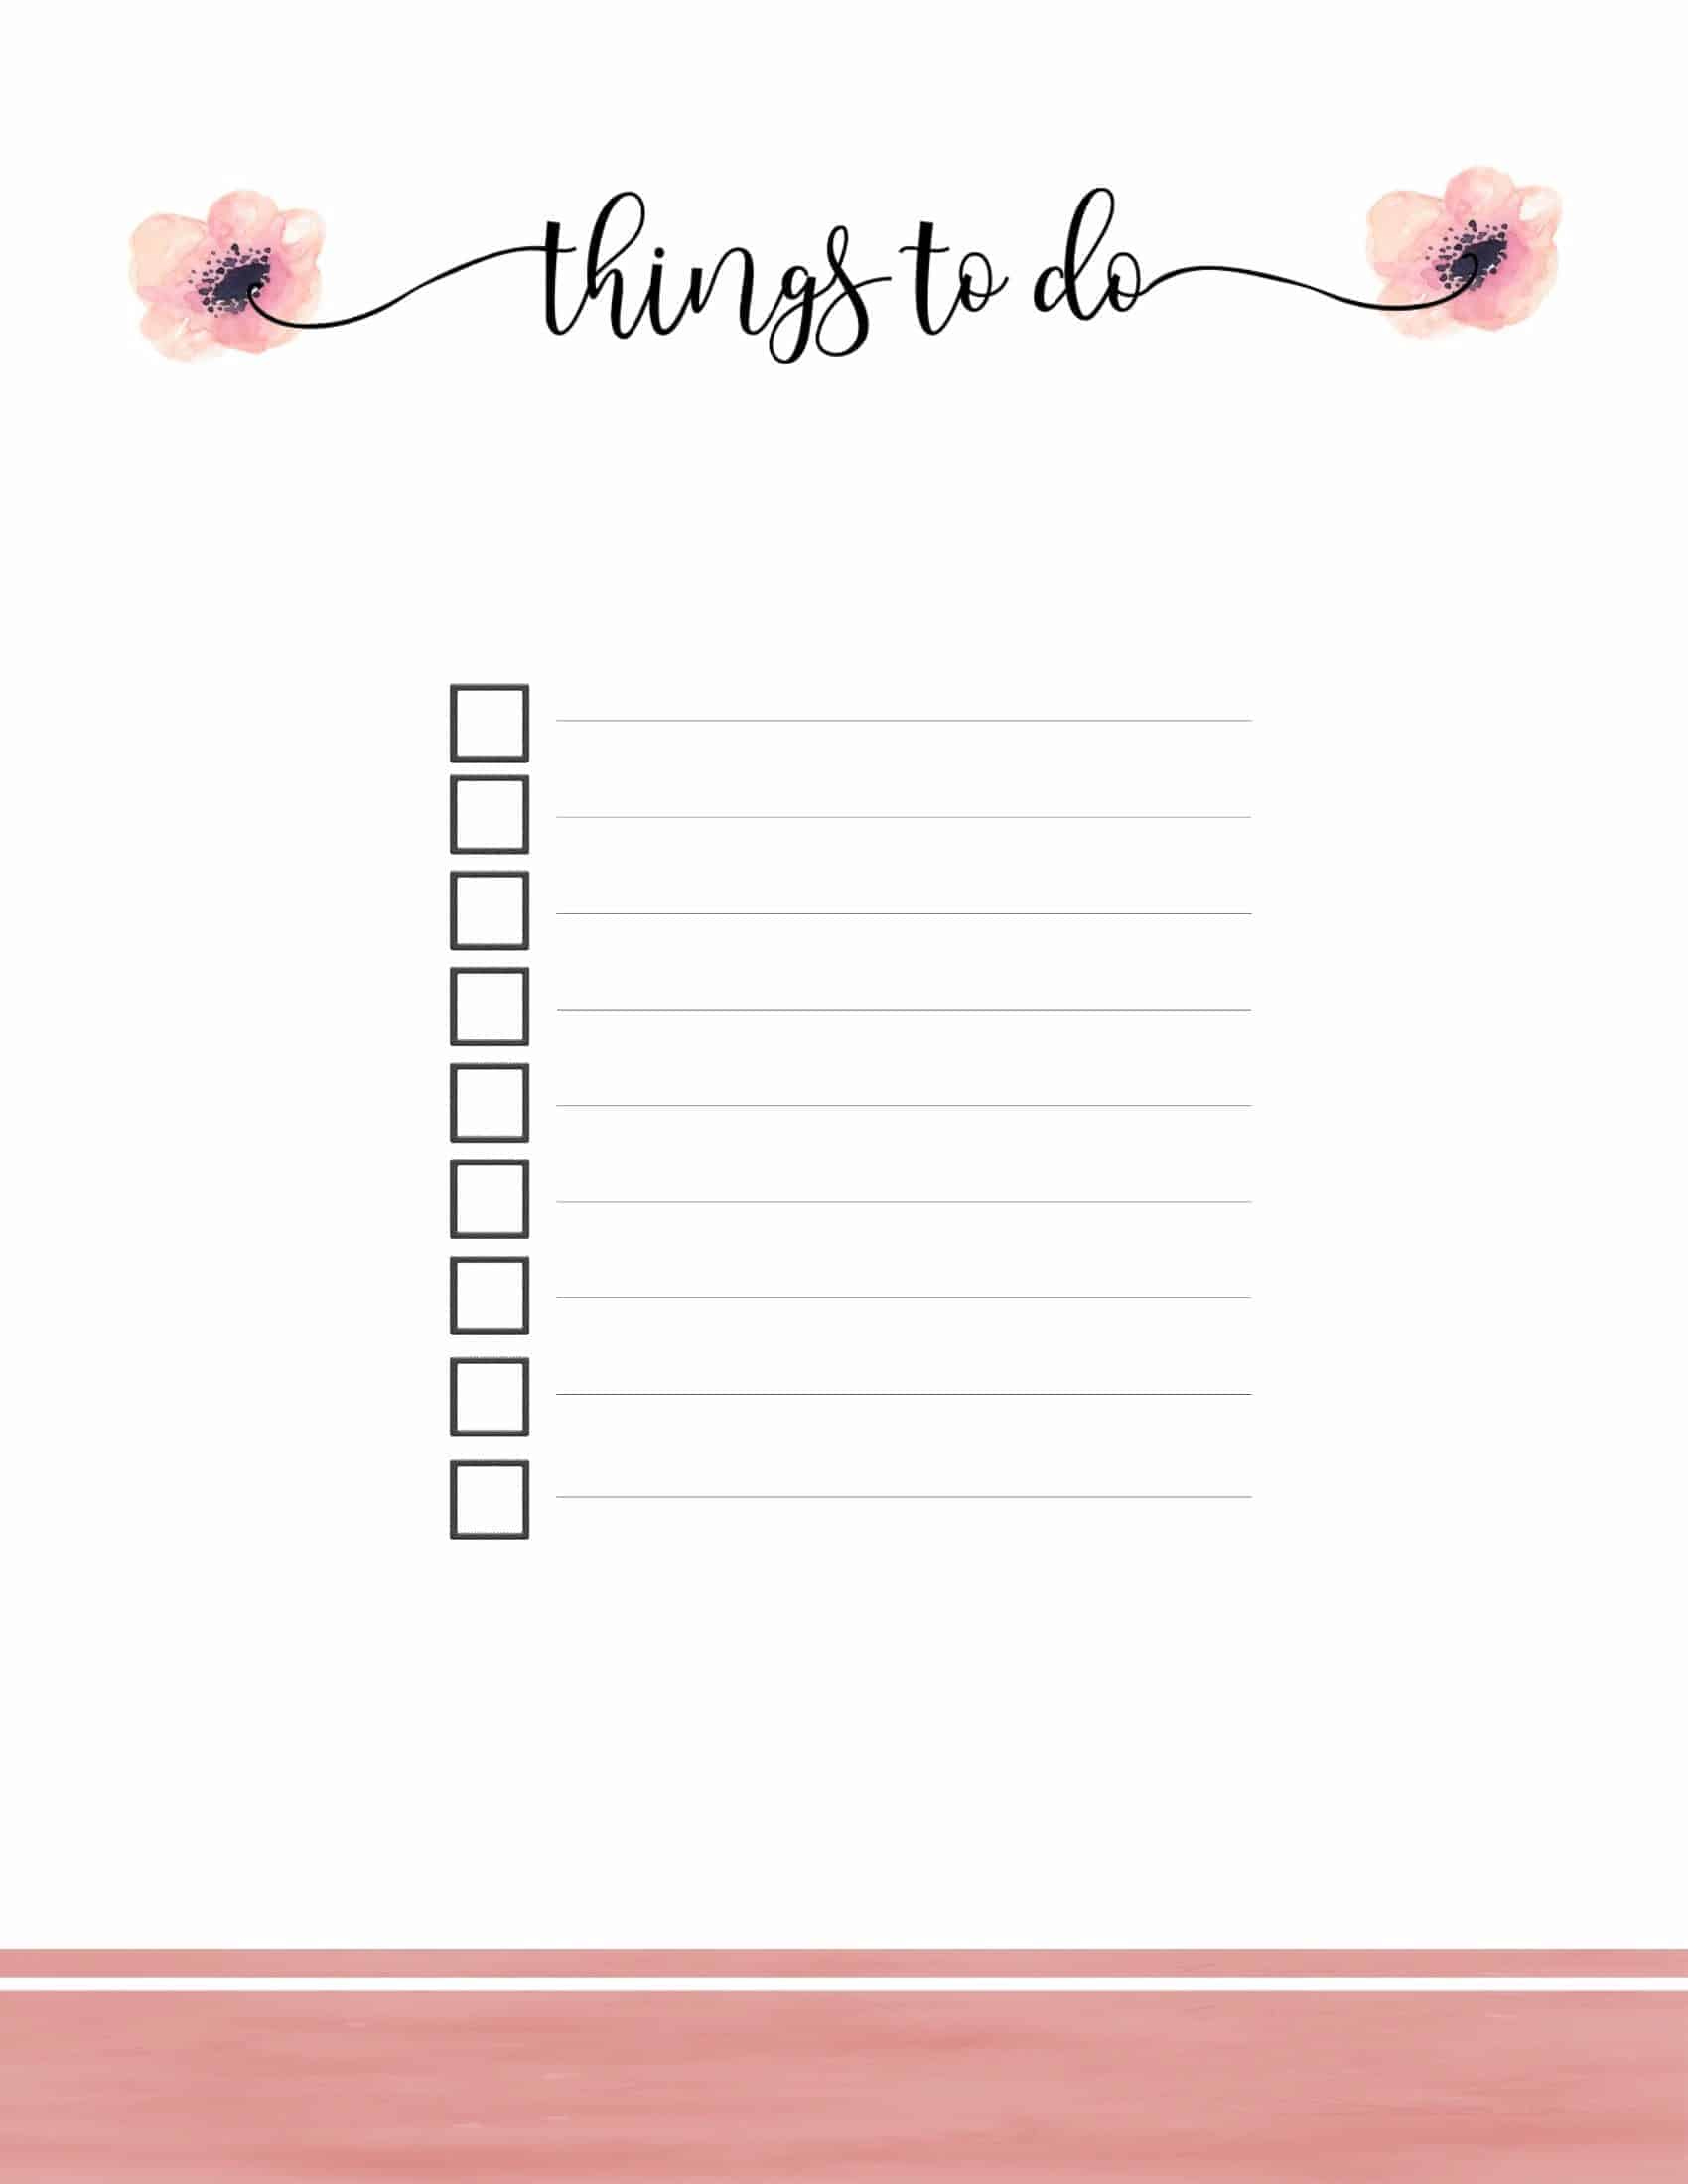 Things To Do Checklist Printable